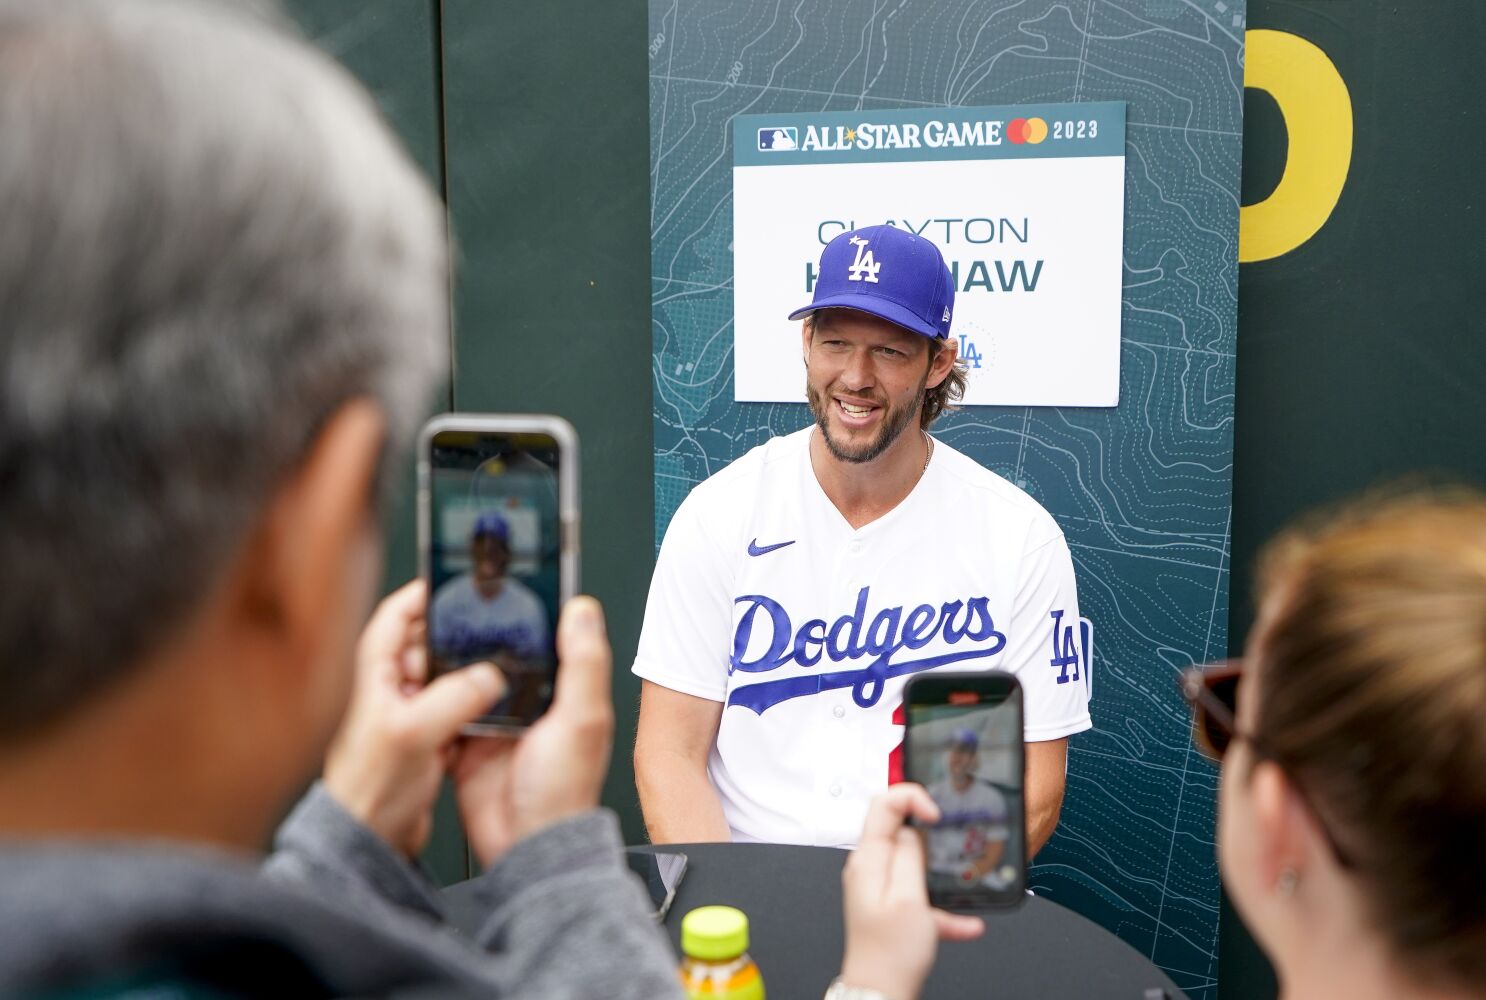 Clayton Kershaw shows why he deserves to start All-Star Game - Los